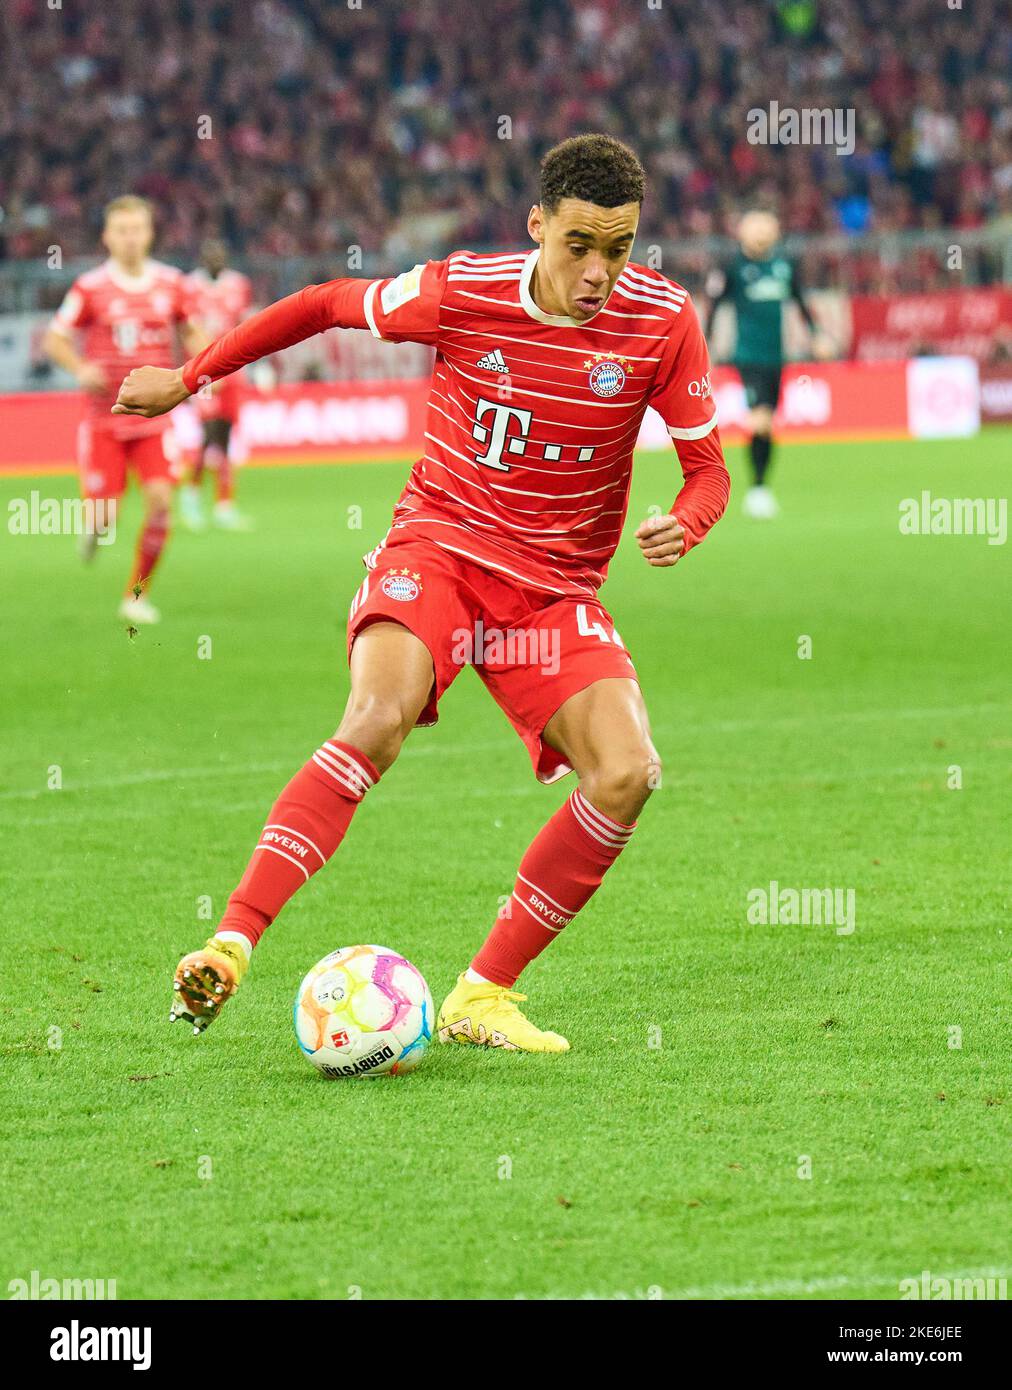 Jamal MUSIALA, FCB 42  in the match FC BAYERN MÜNCHEN - SV WERDER BREMEN 6-1 1.German Football League on Nov 8, 2022 in Munich, Germany. Season 2022/2023, matchday 14, 1.Bundesliga, FCB, München, 14.Spieltag © Peter Schatz / Alamy Live News    - DFL REGULATIONS PROHIBIT ANY USE OF PHOTOGRAPHS as IMAGE SEQUENCES and/or QUASI-VIDEO - Stock Photo